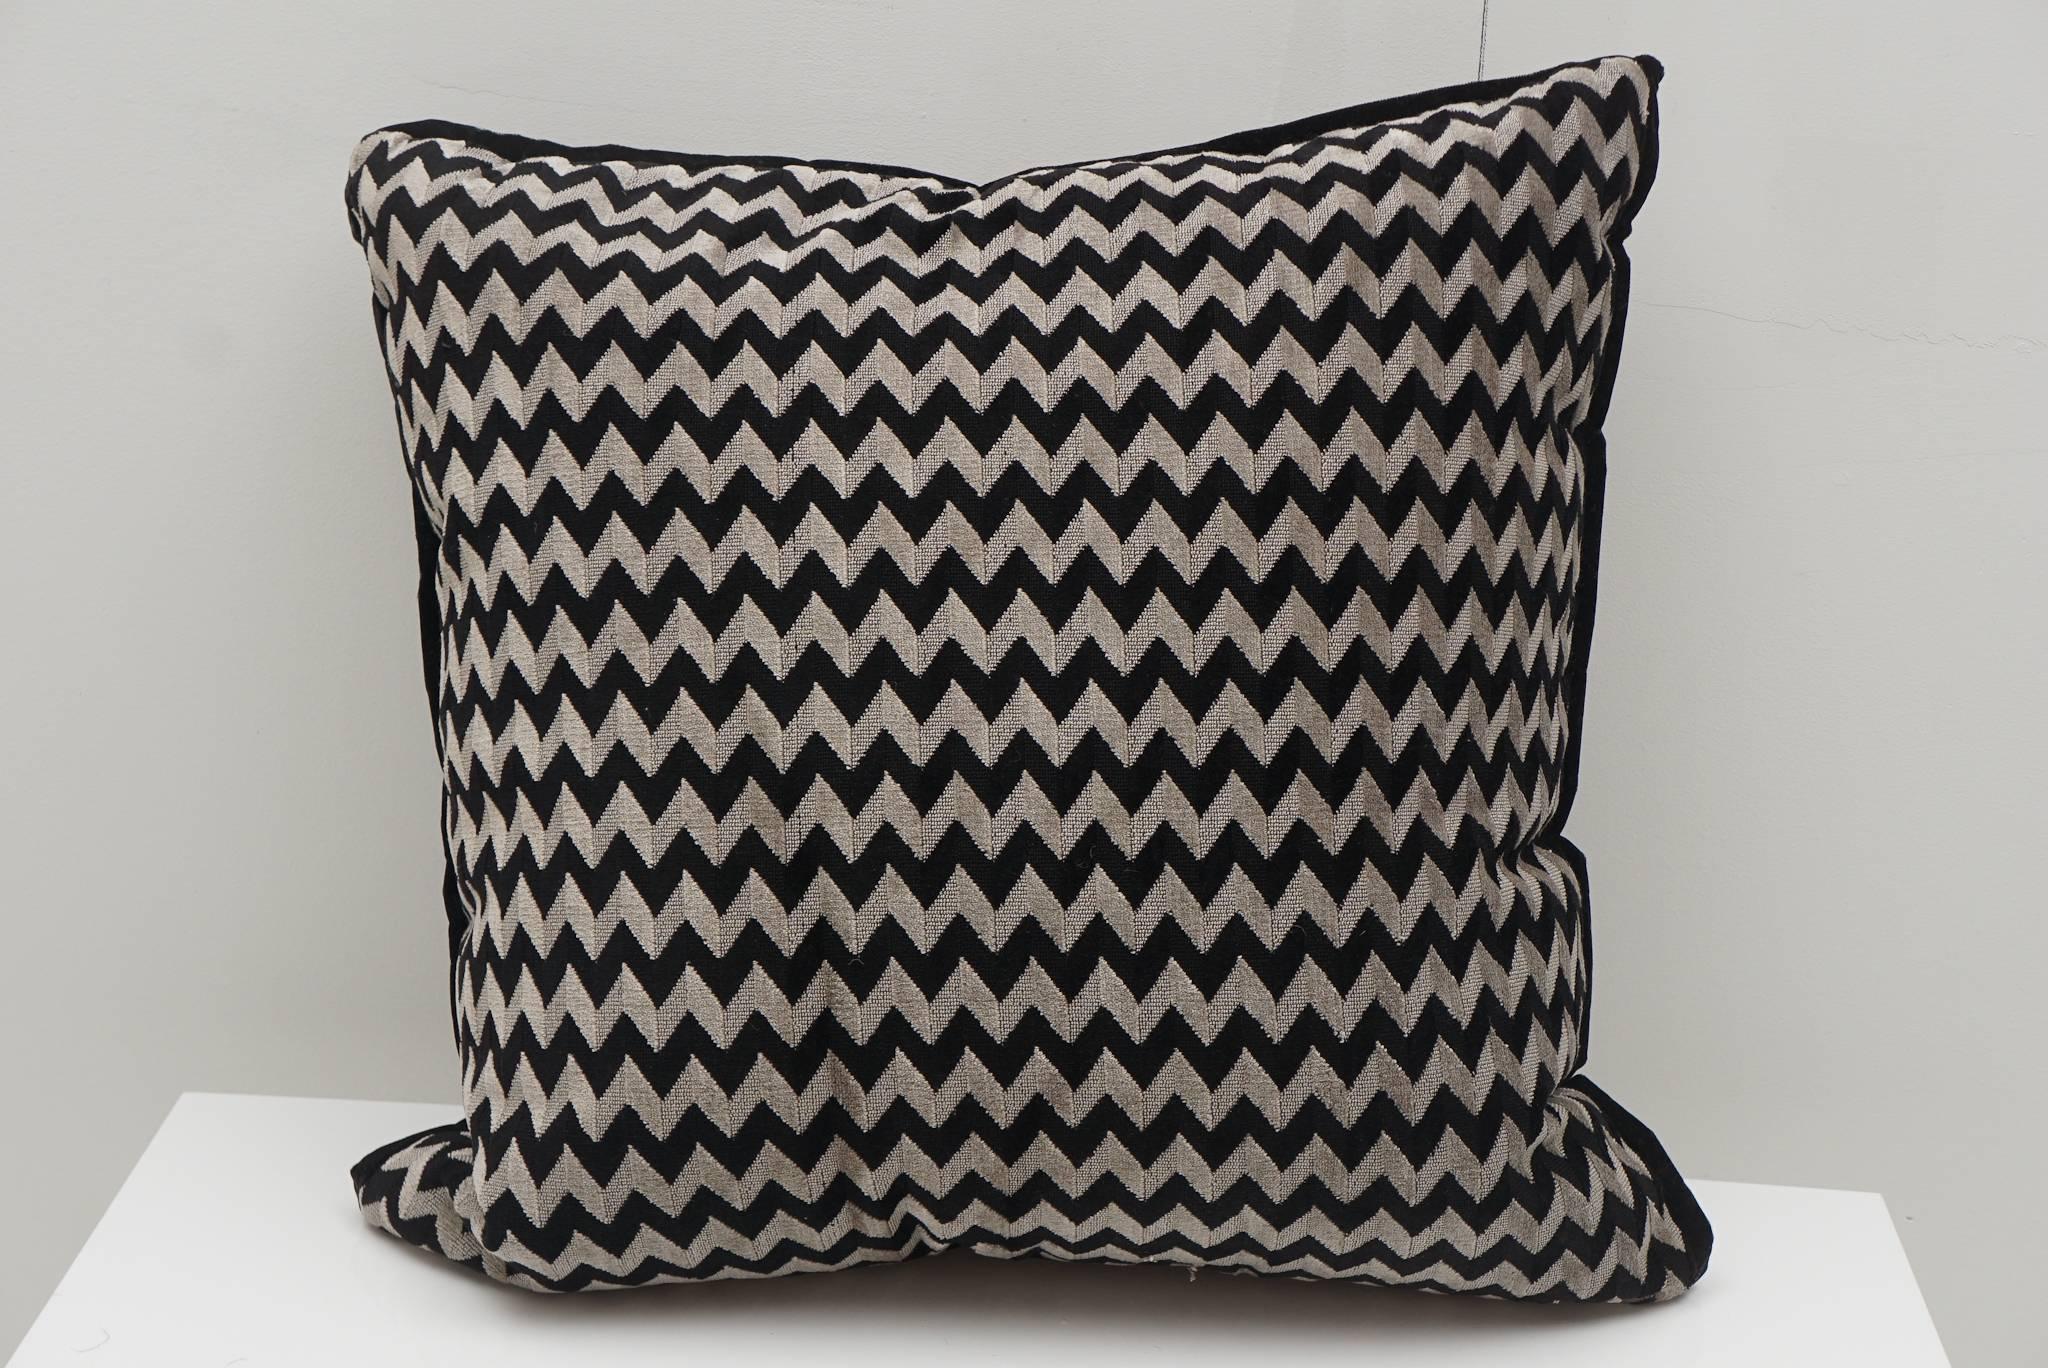 American Zig Zag Pillows For Sale